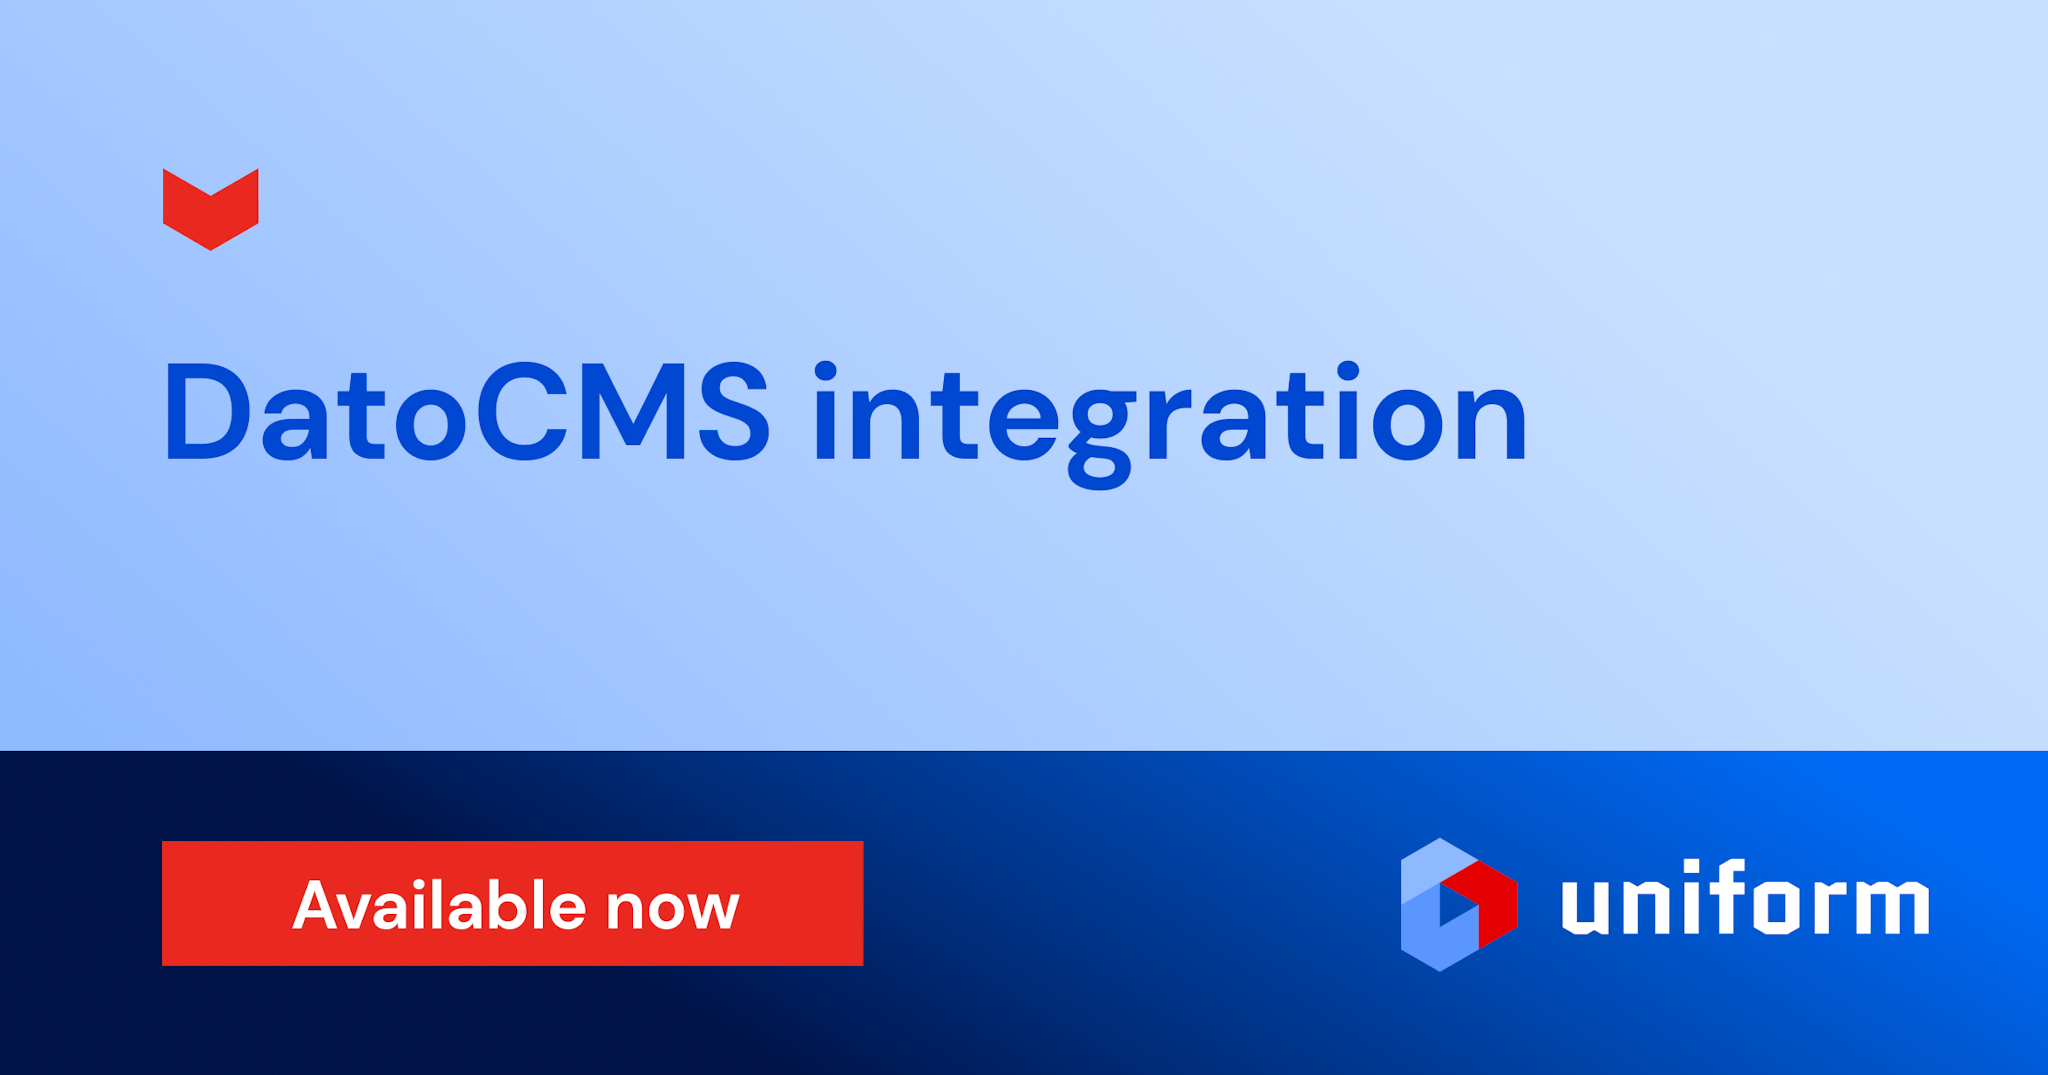 New CMS integration with DatoCMS